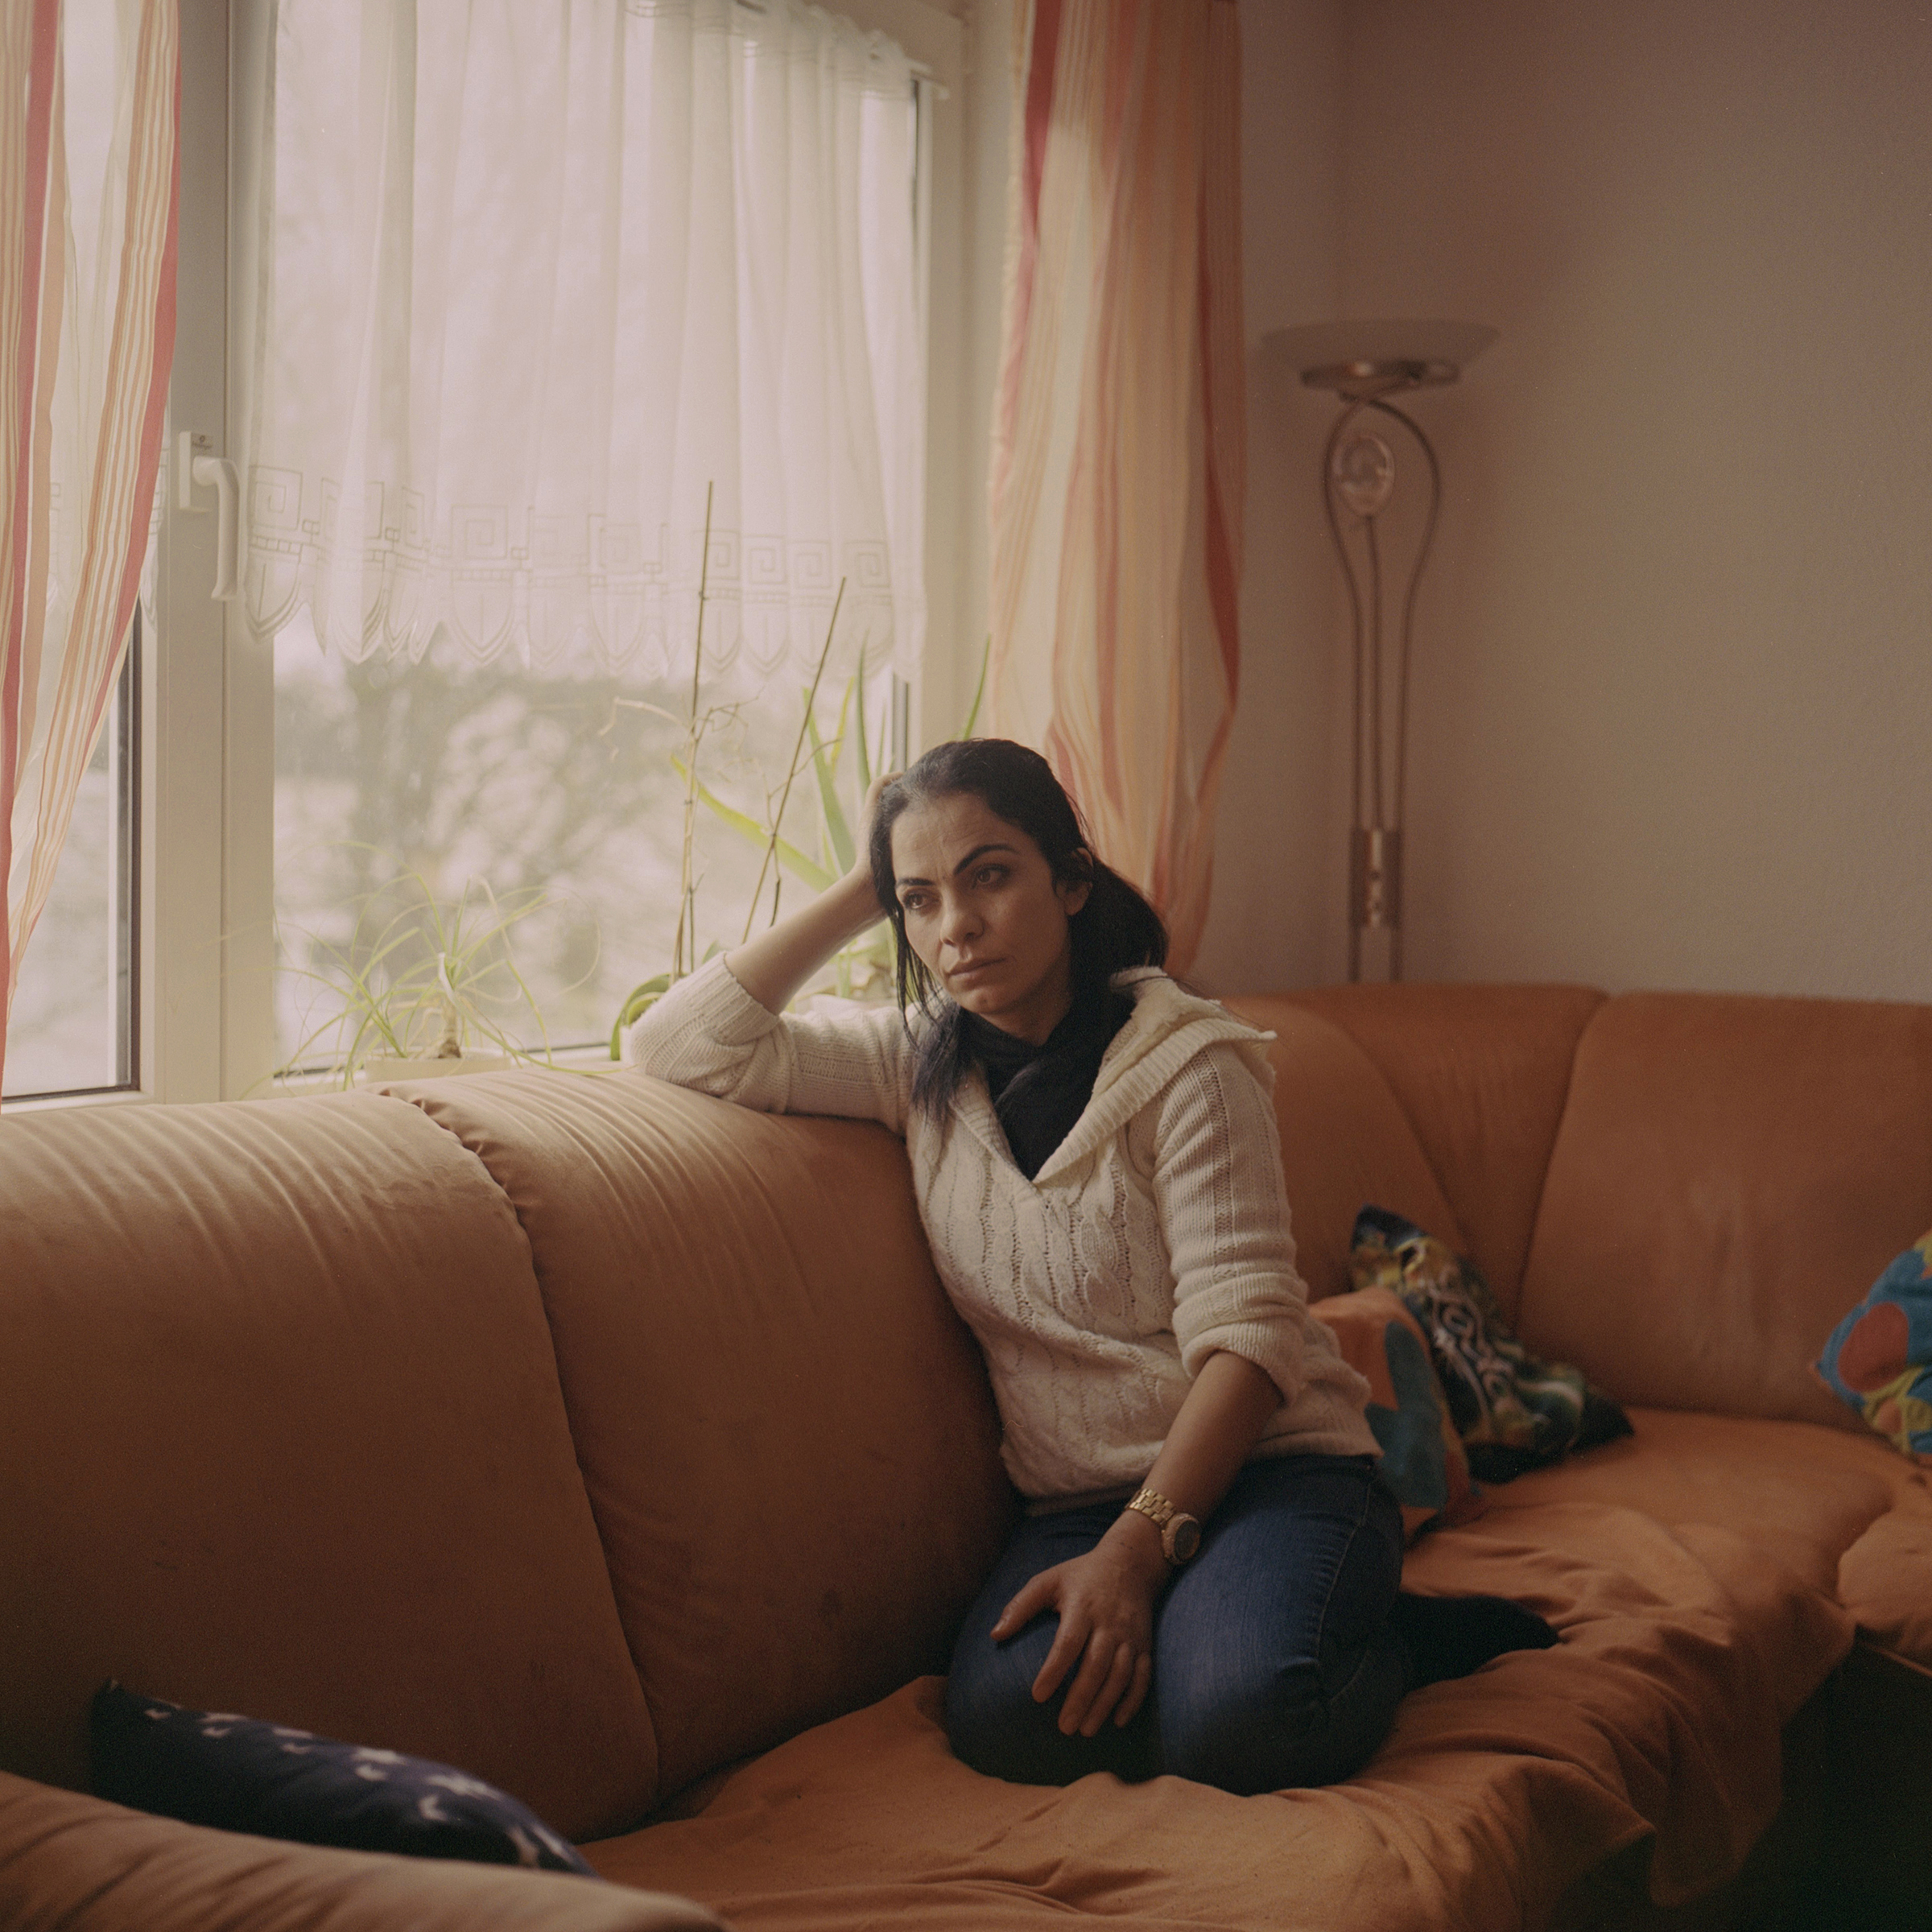 Hanan on the sofa in her living room in Germany. (Tori Ferenc—INSTITUTE for TIME)